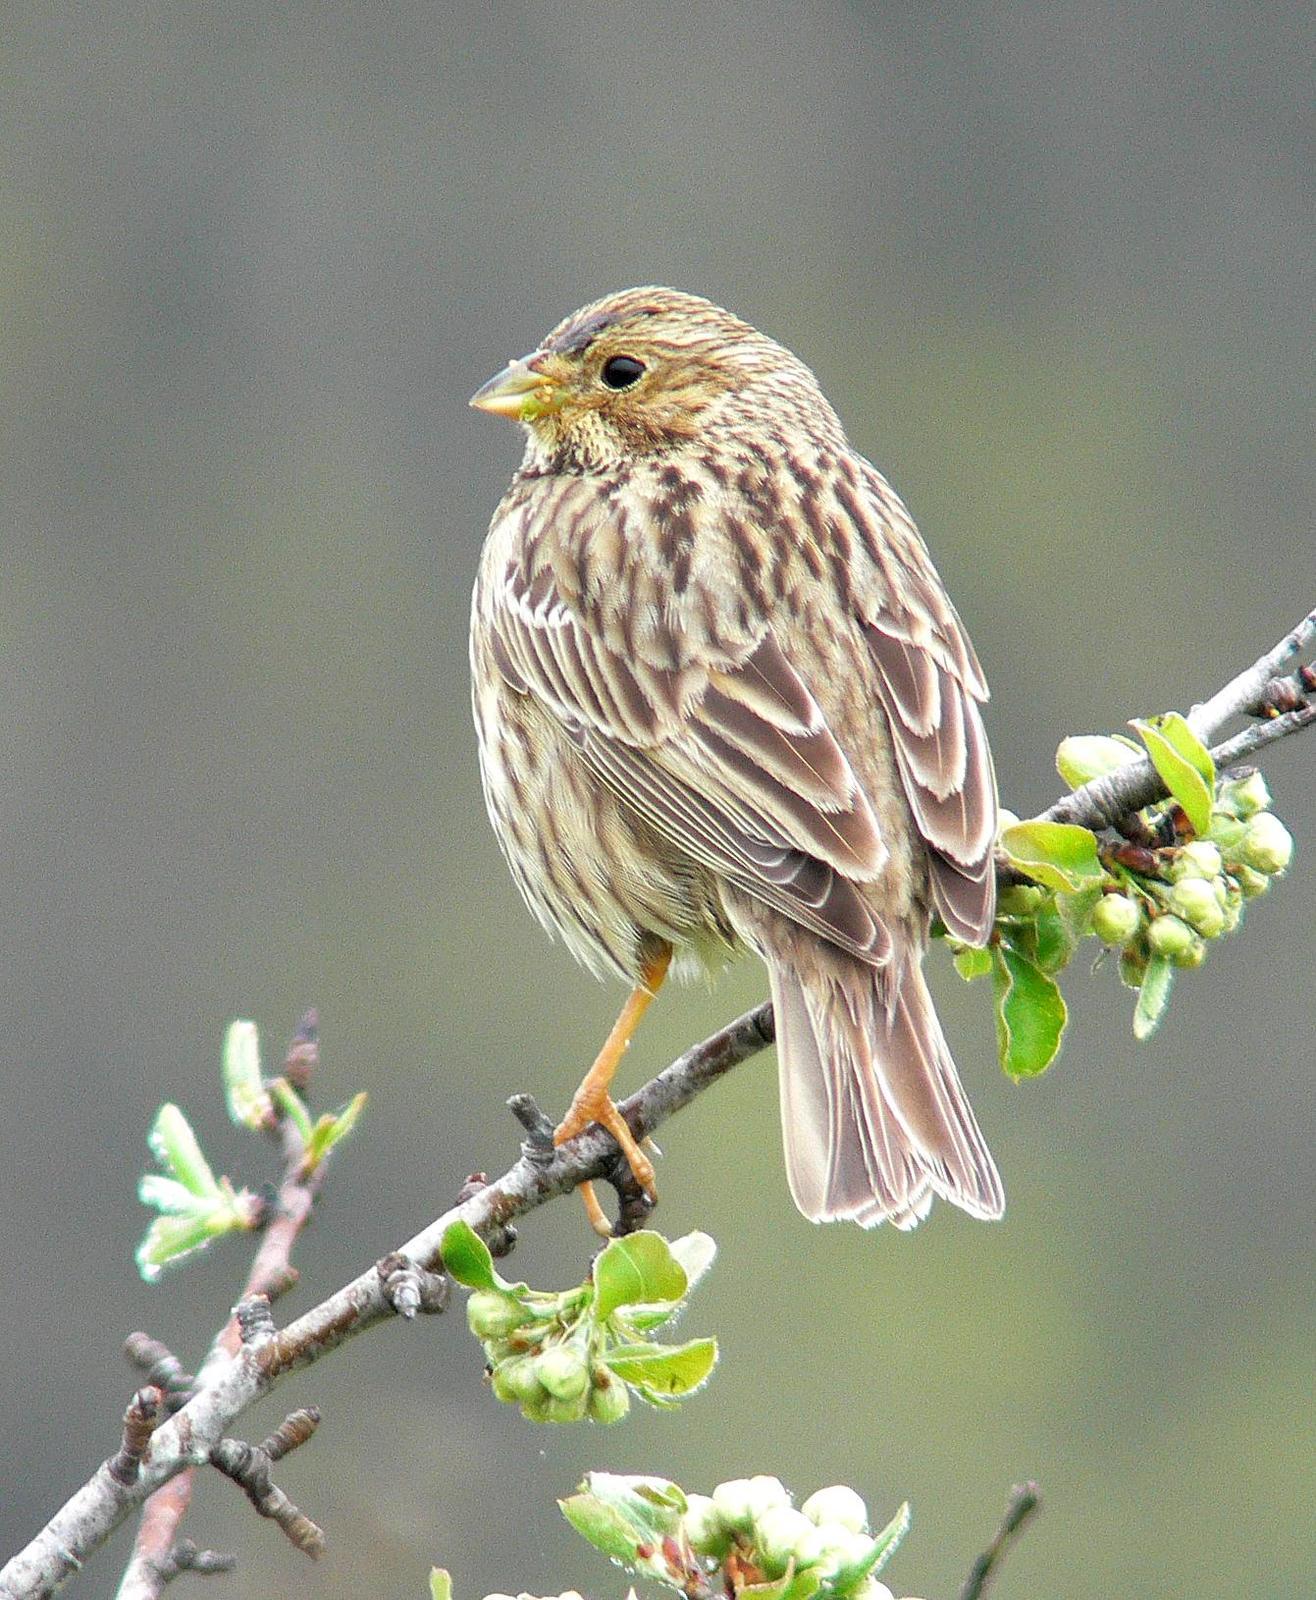 Corn Bunting Photo by Steven Mlodinow